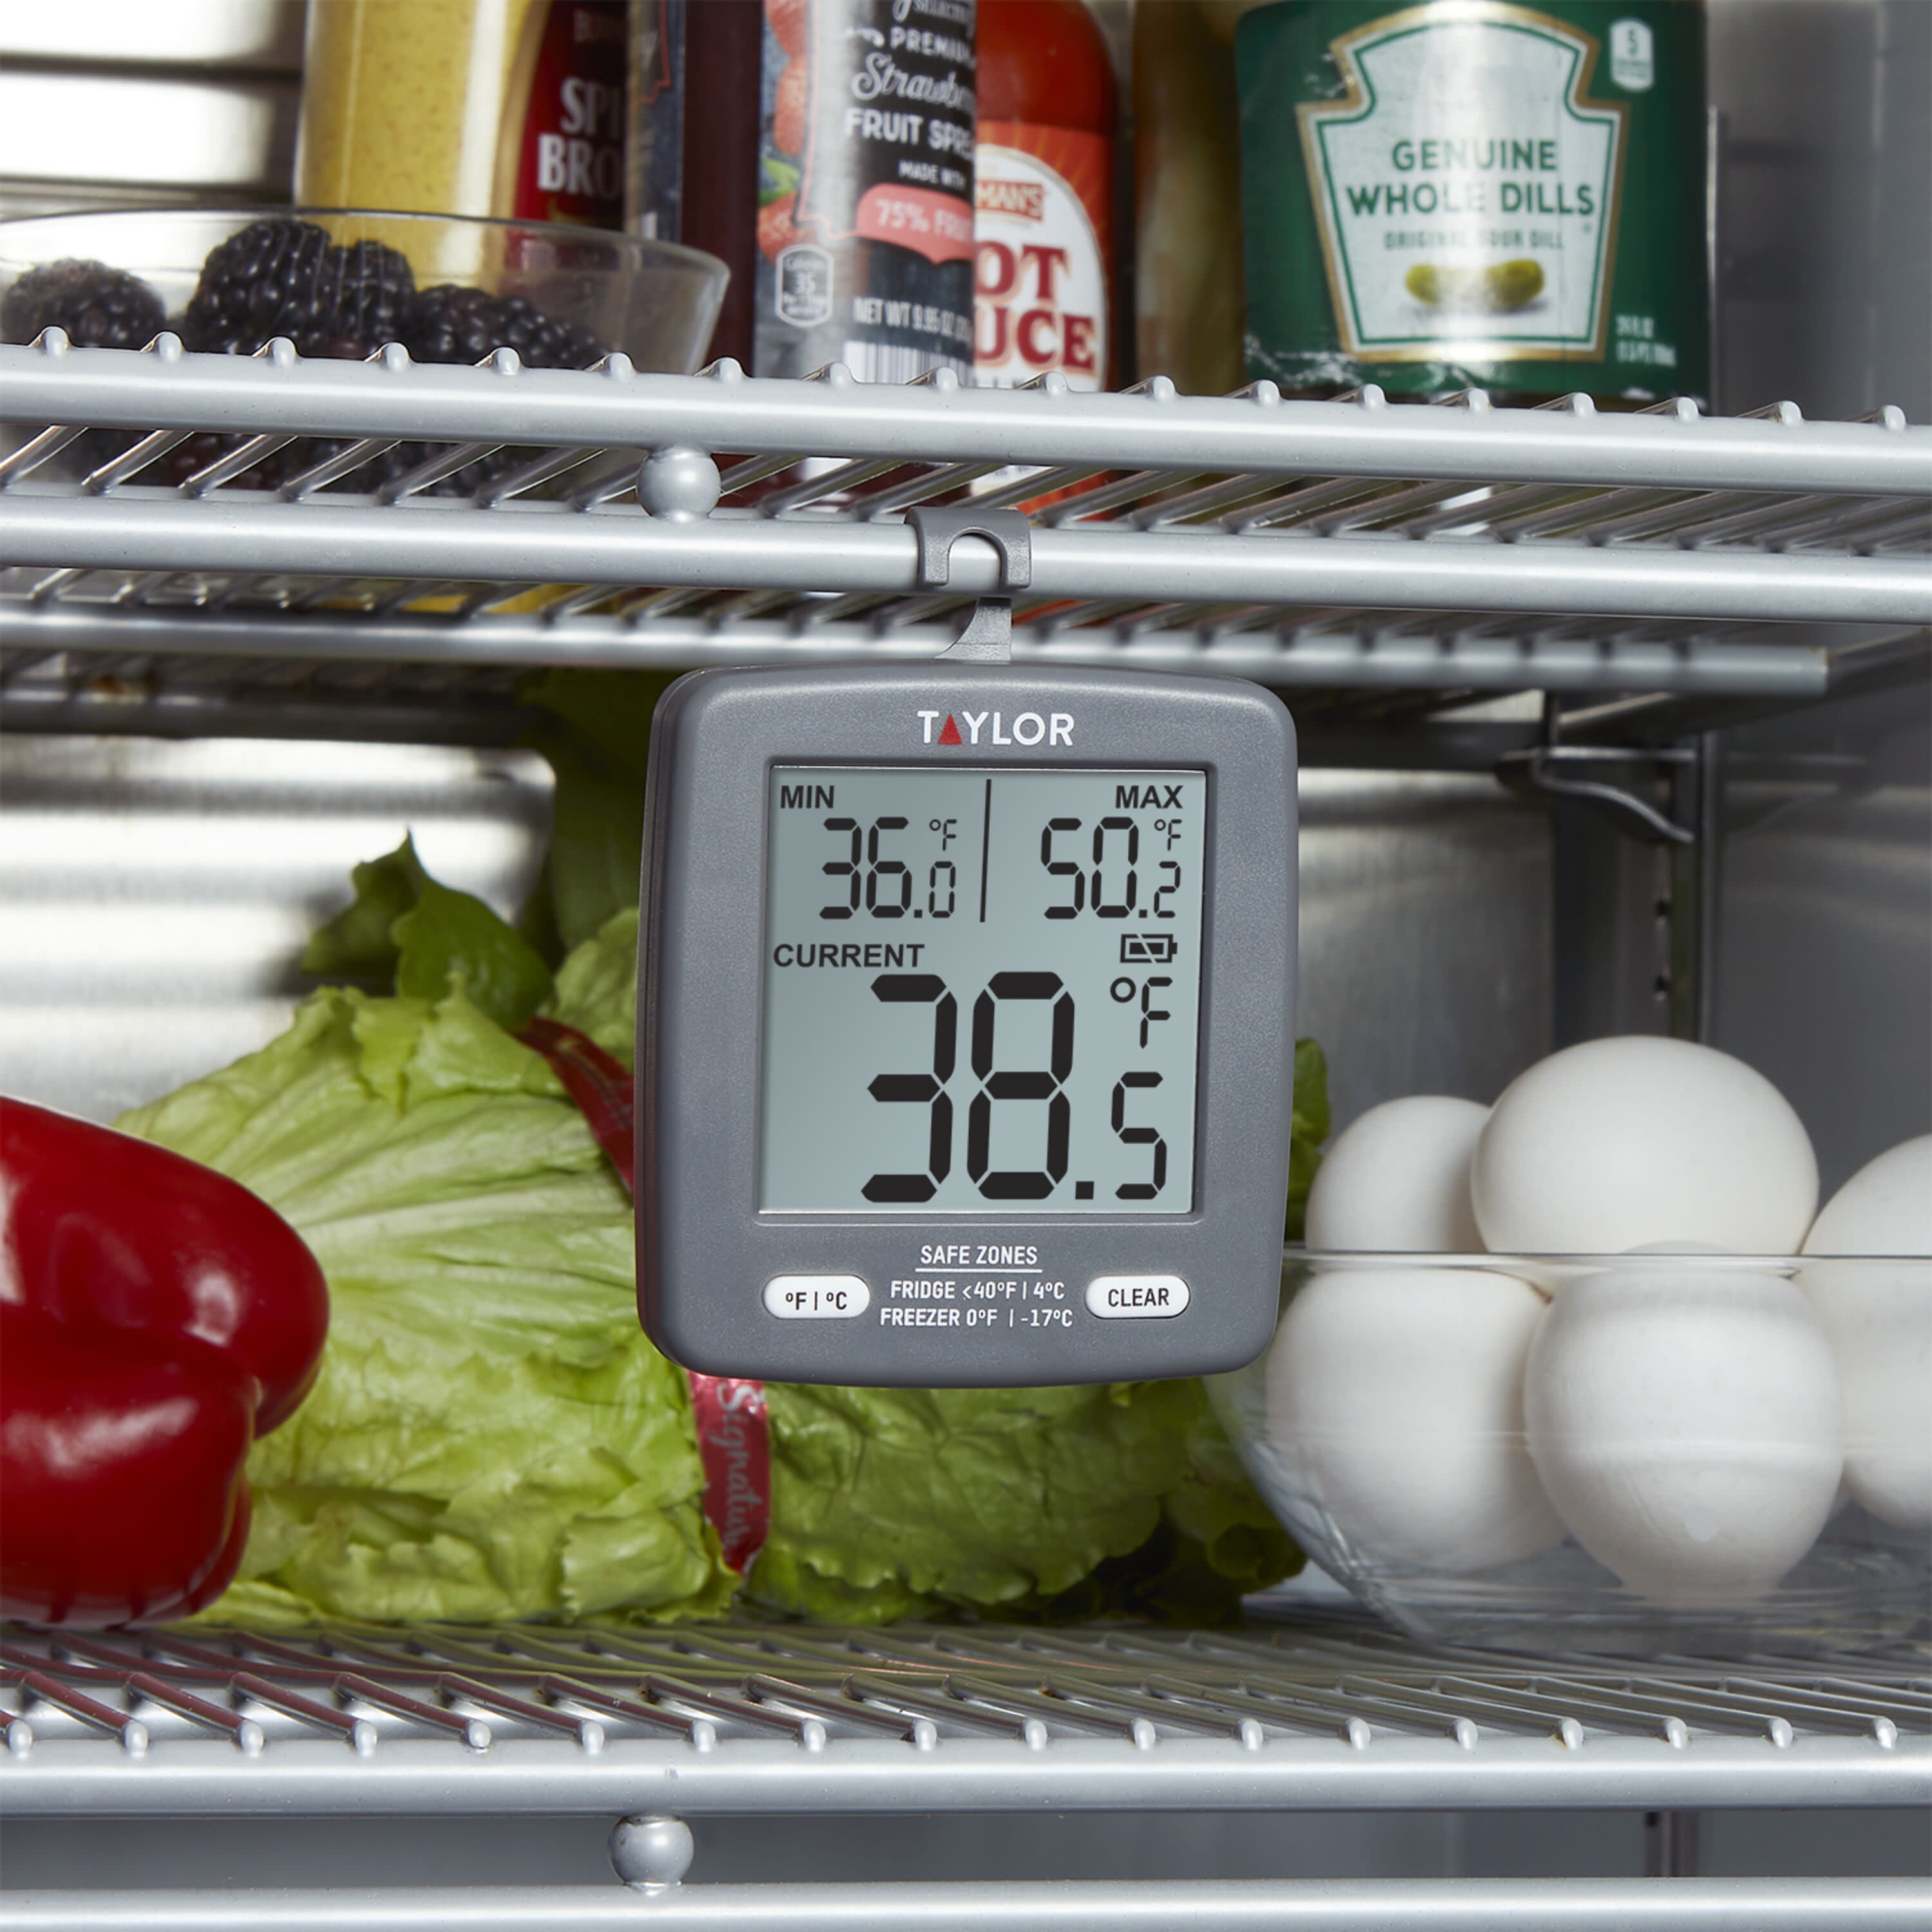 Taylor 1445 Taylor 1445 Pro Series Digital Fridge-freezer Thermometer with Safety Zone